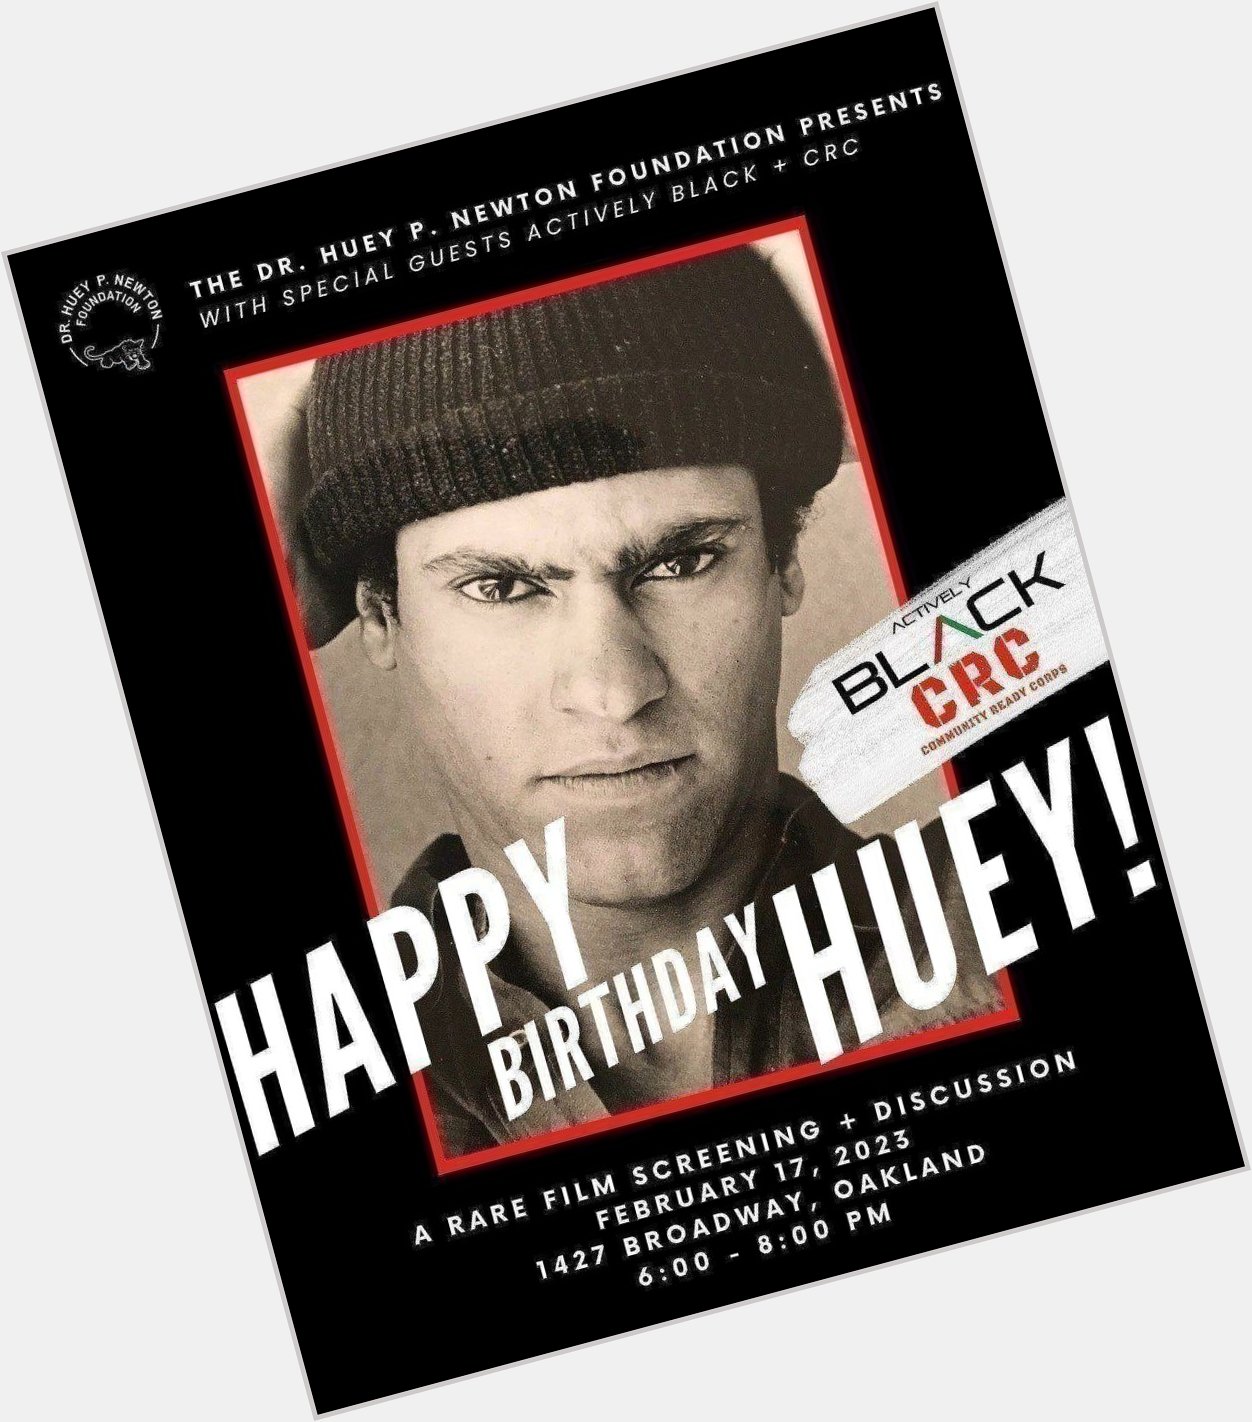  these amazing events are happening today. Happy Birthday Dr. Huey P. Newton 